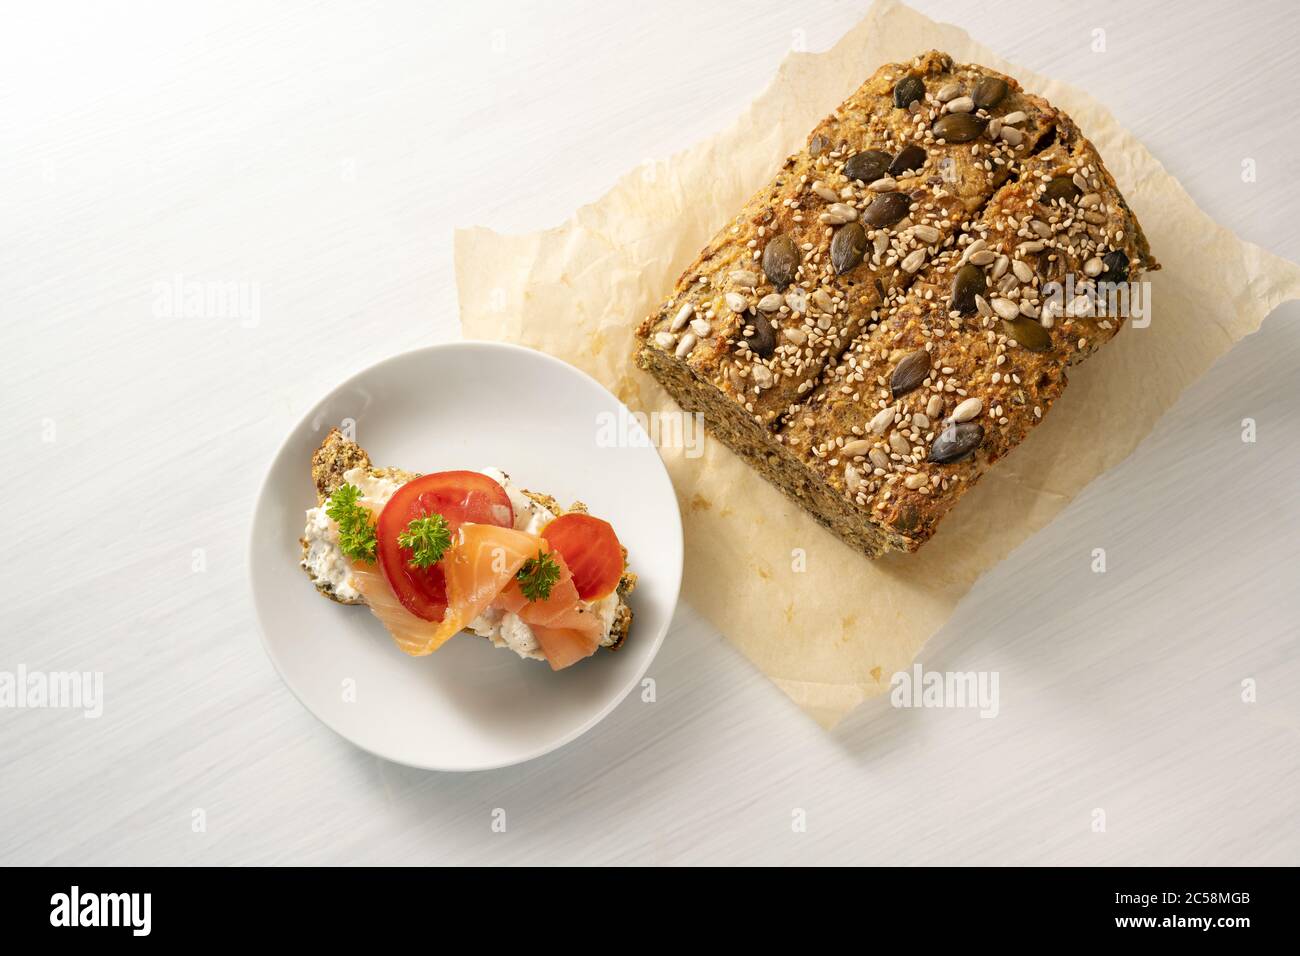 Low carb protein bread with seeds on baking paper and a sandwich with salmon, tomatoes and parsley garnish on a white table, healthy slimming diet, co Stock Photo